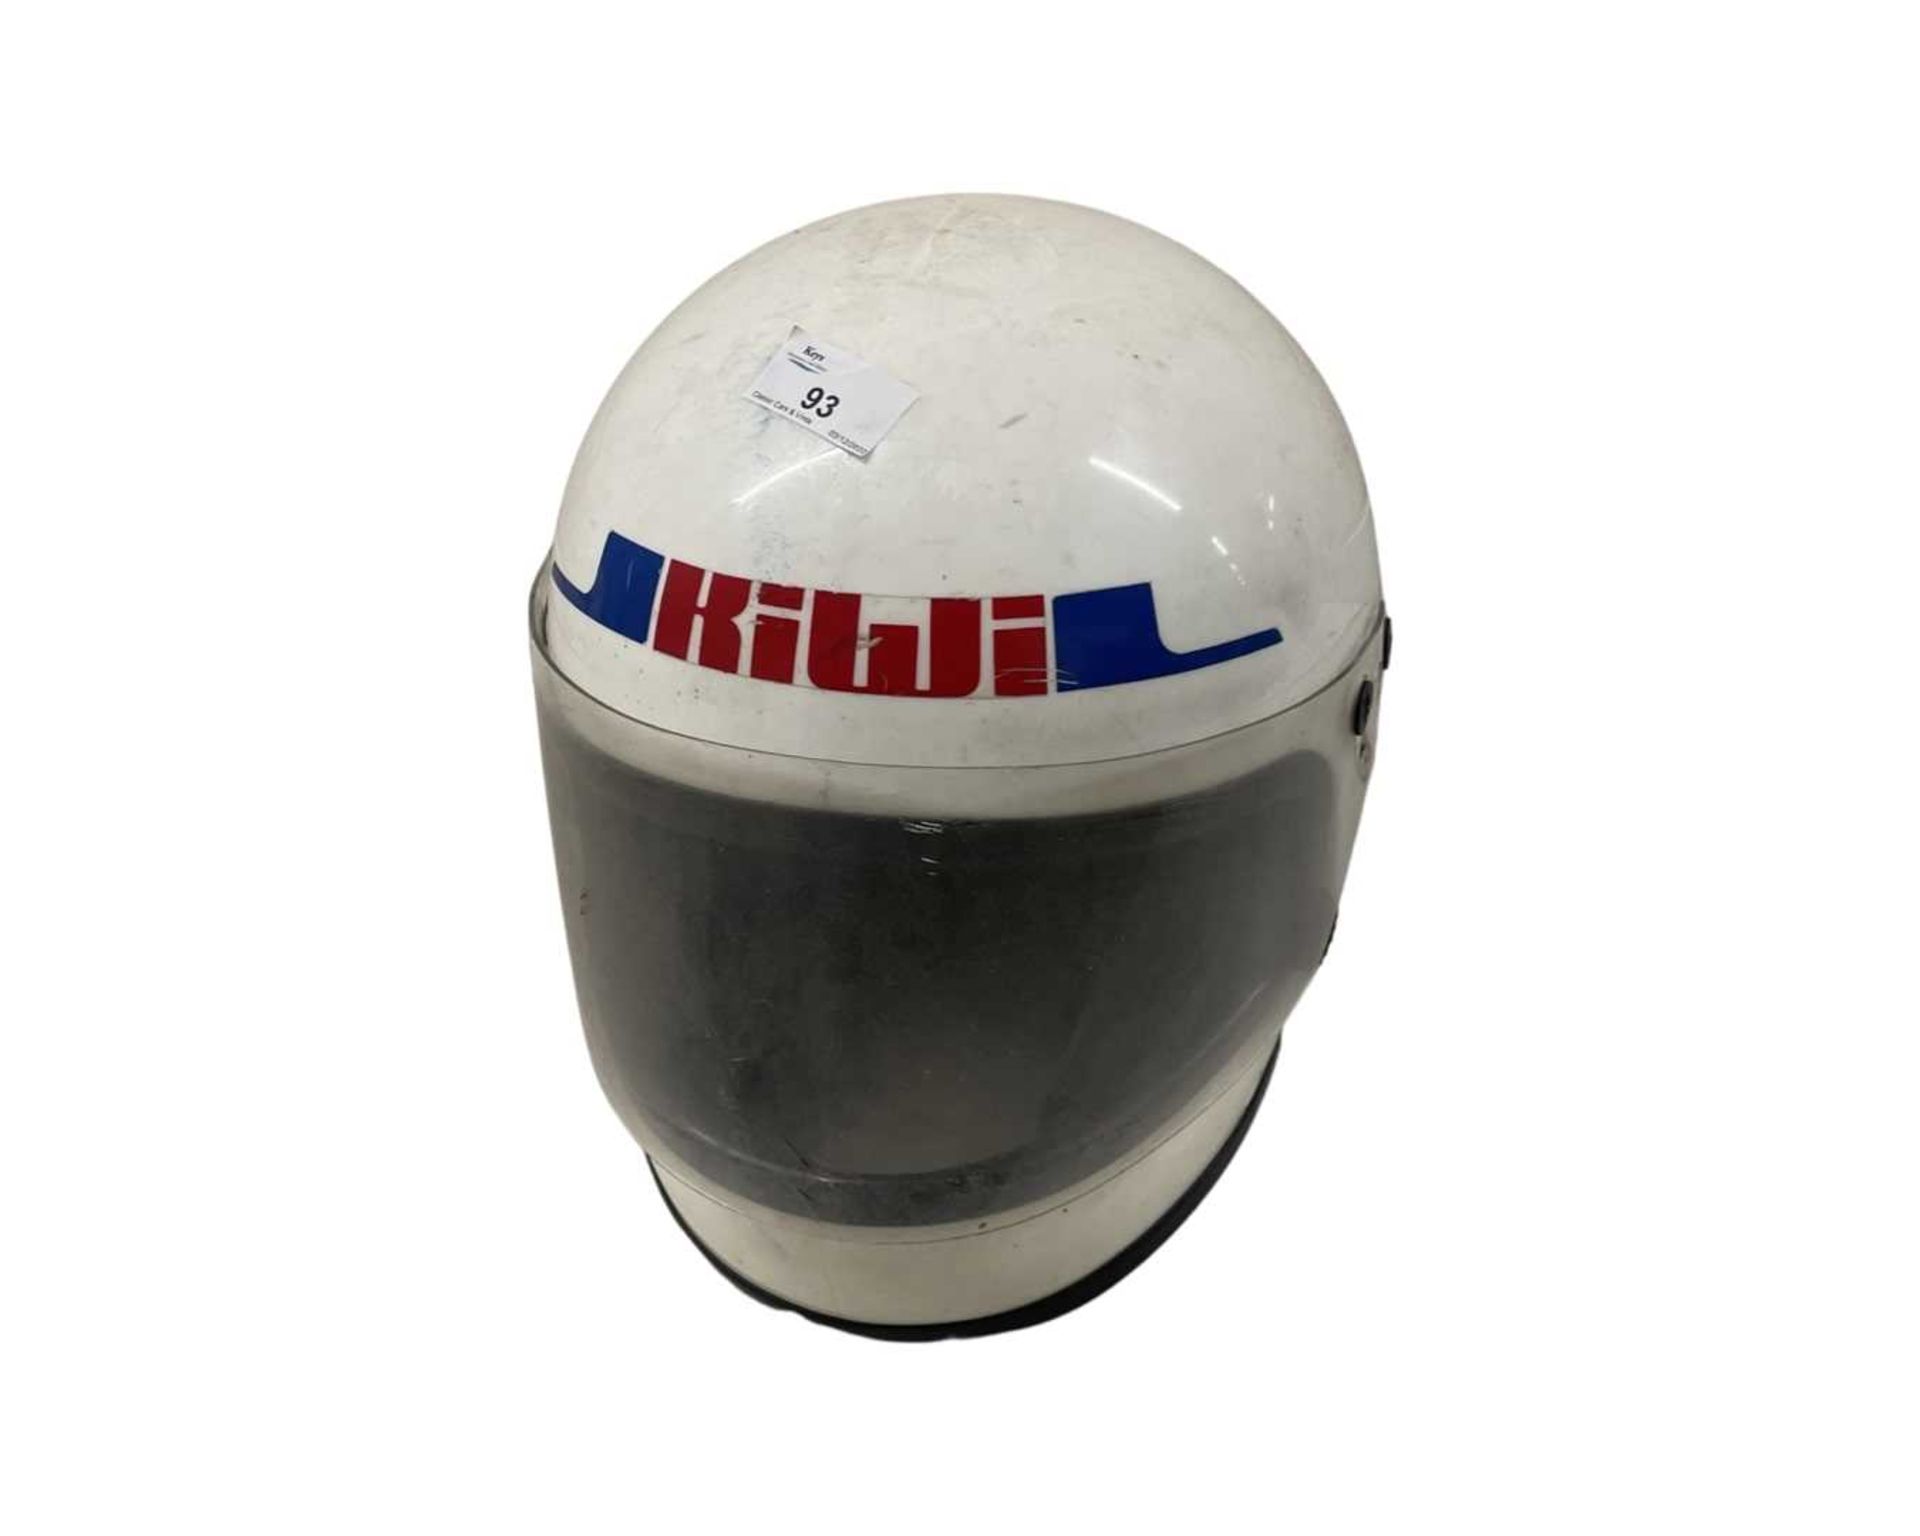 1970's crash helmet (for display purposes/collecting only)